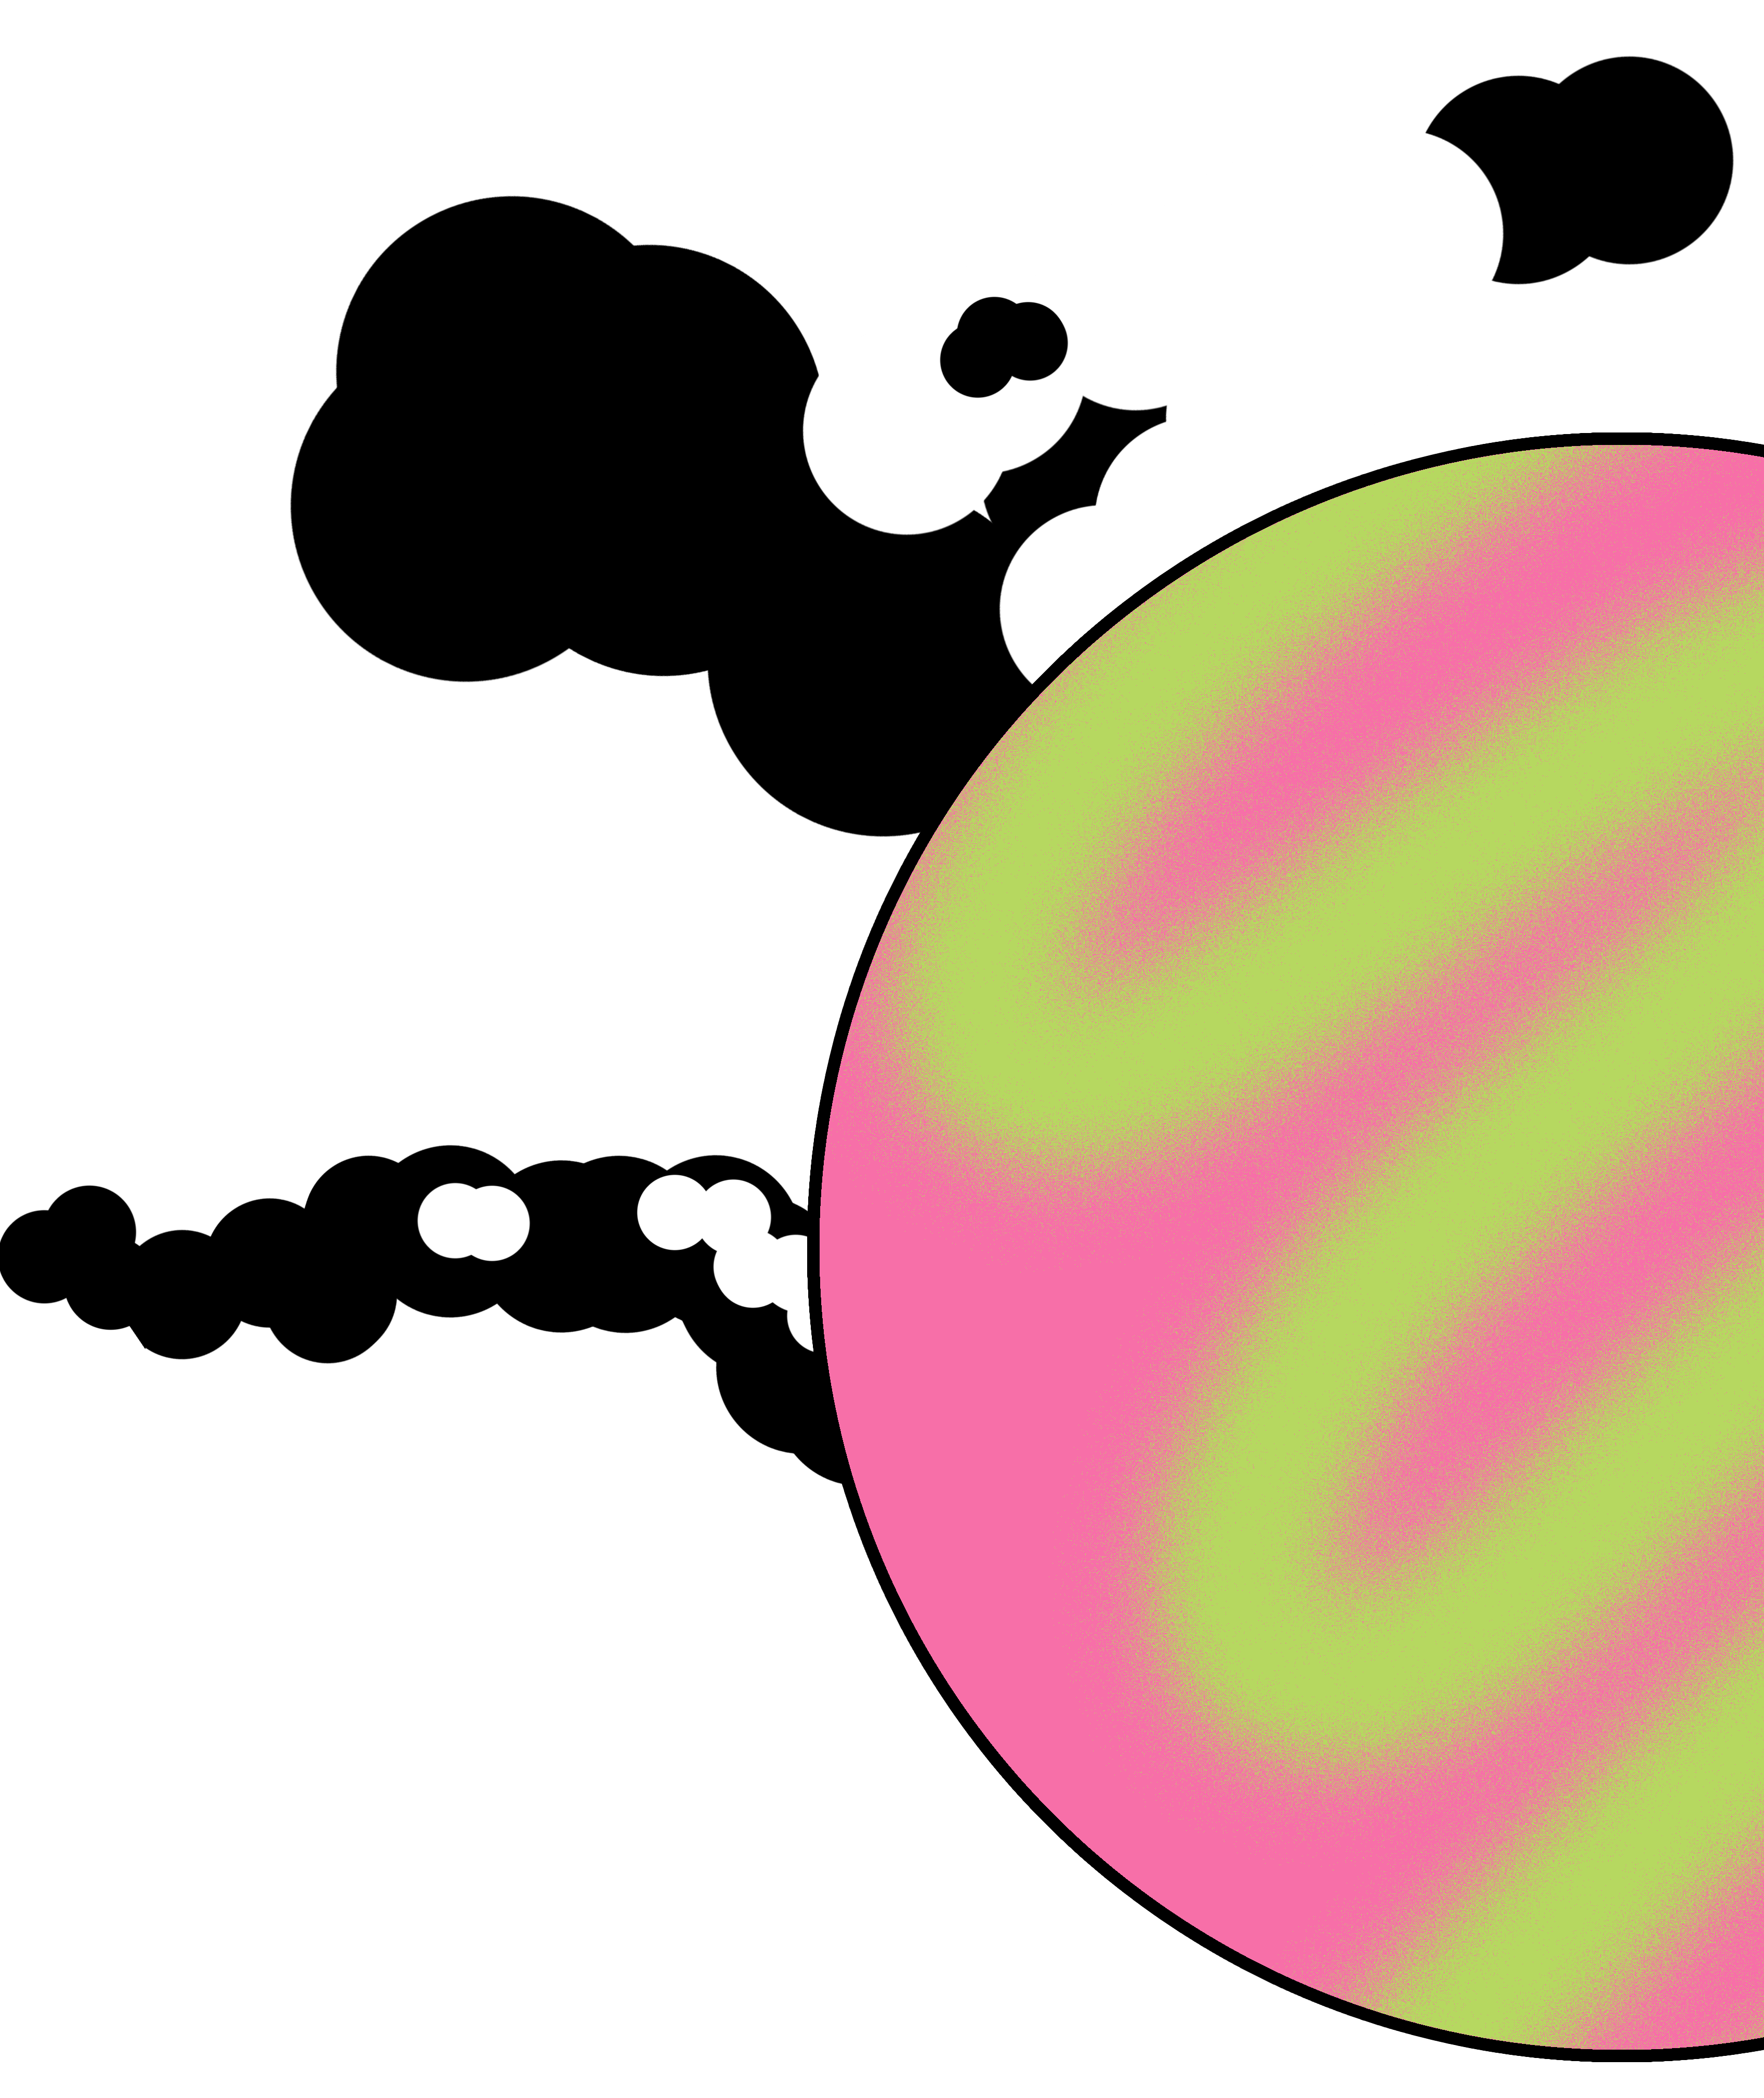 Image of Hamish made out of circles hiding behind a pink circle with a green swoosh on it